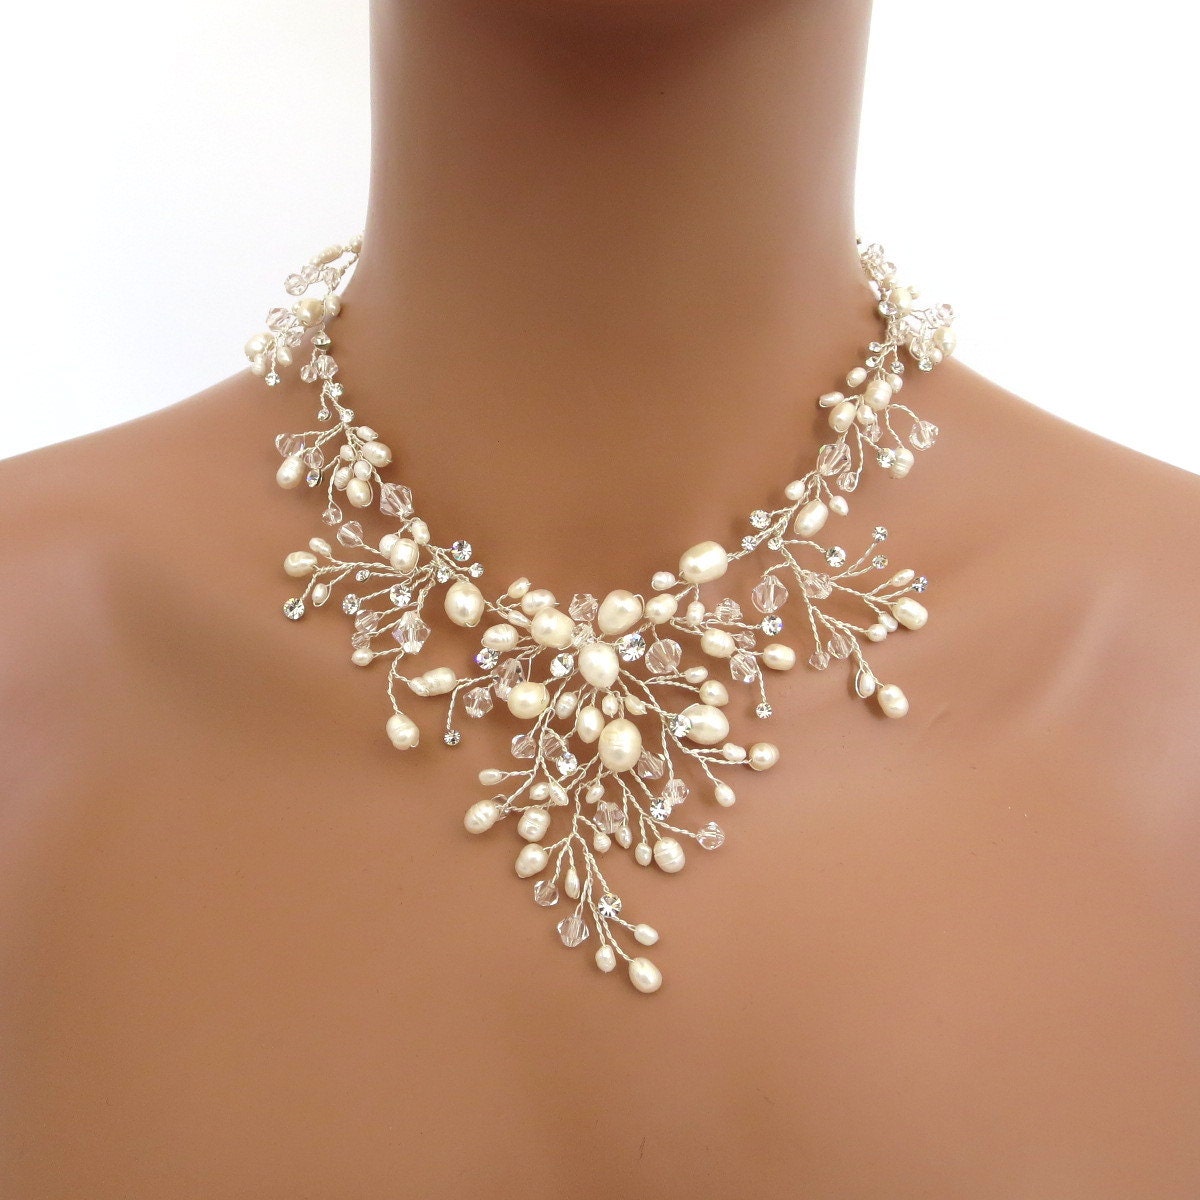 Bridal necklace Pearl necklace Wedding jewelry set